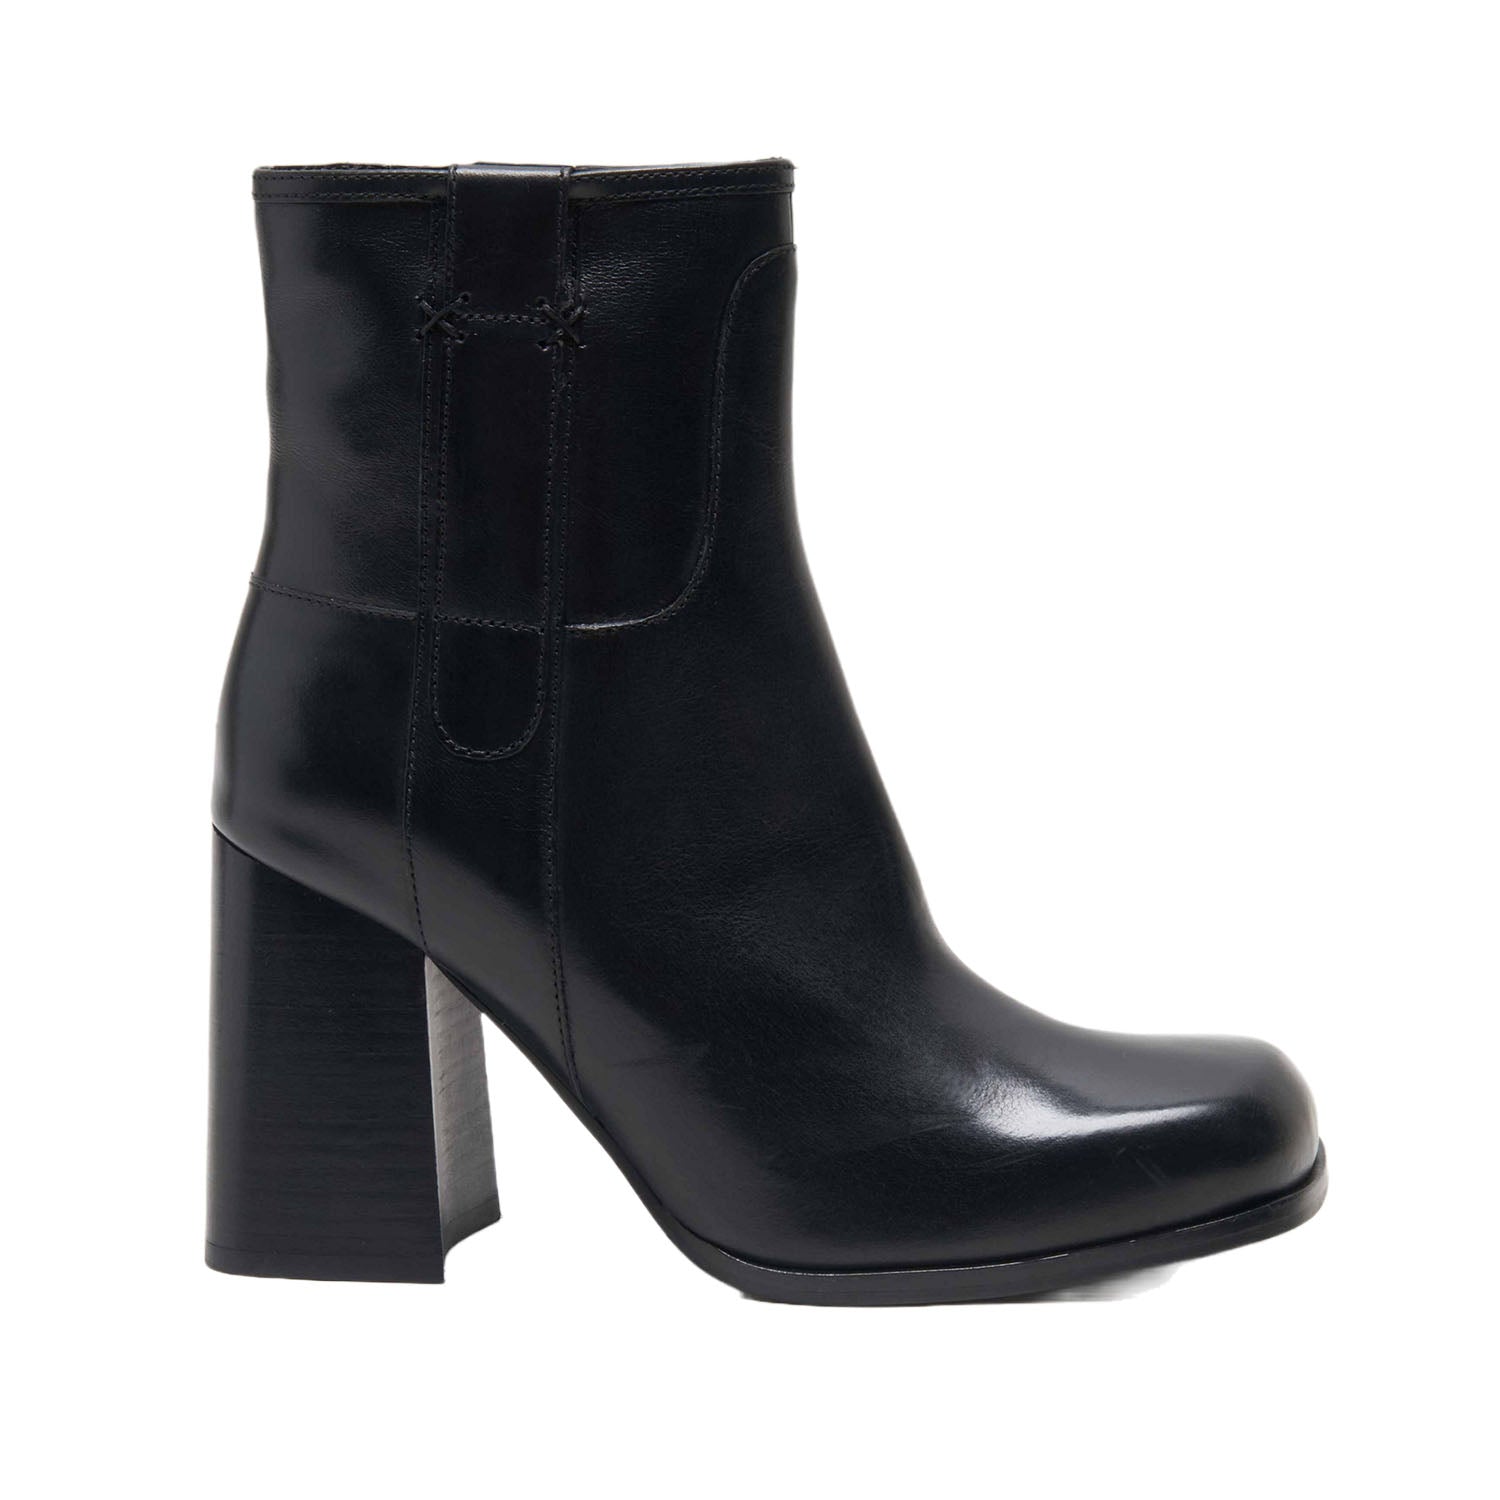 Free People Women's Naomi Ankle Boot in Black